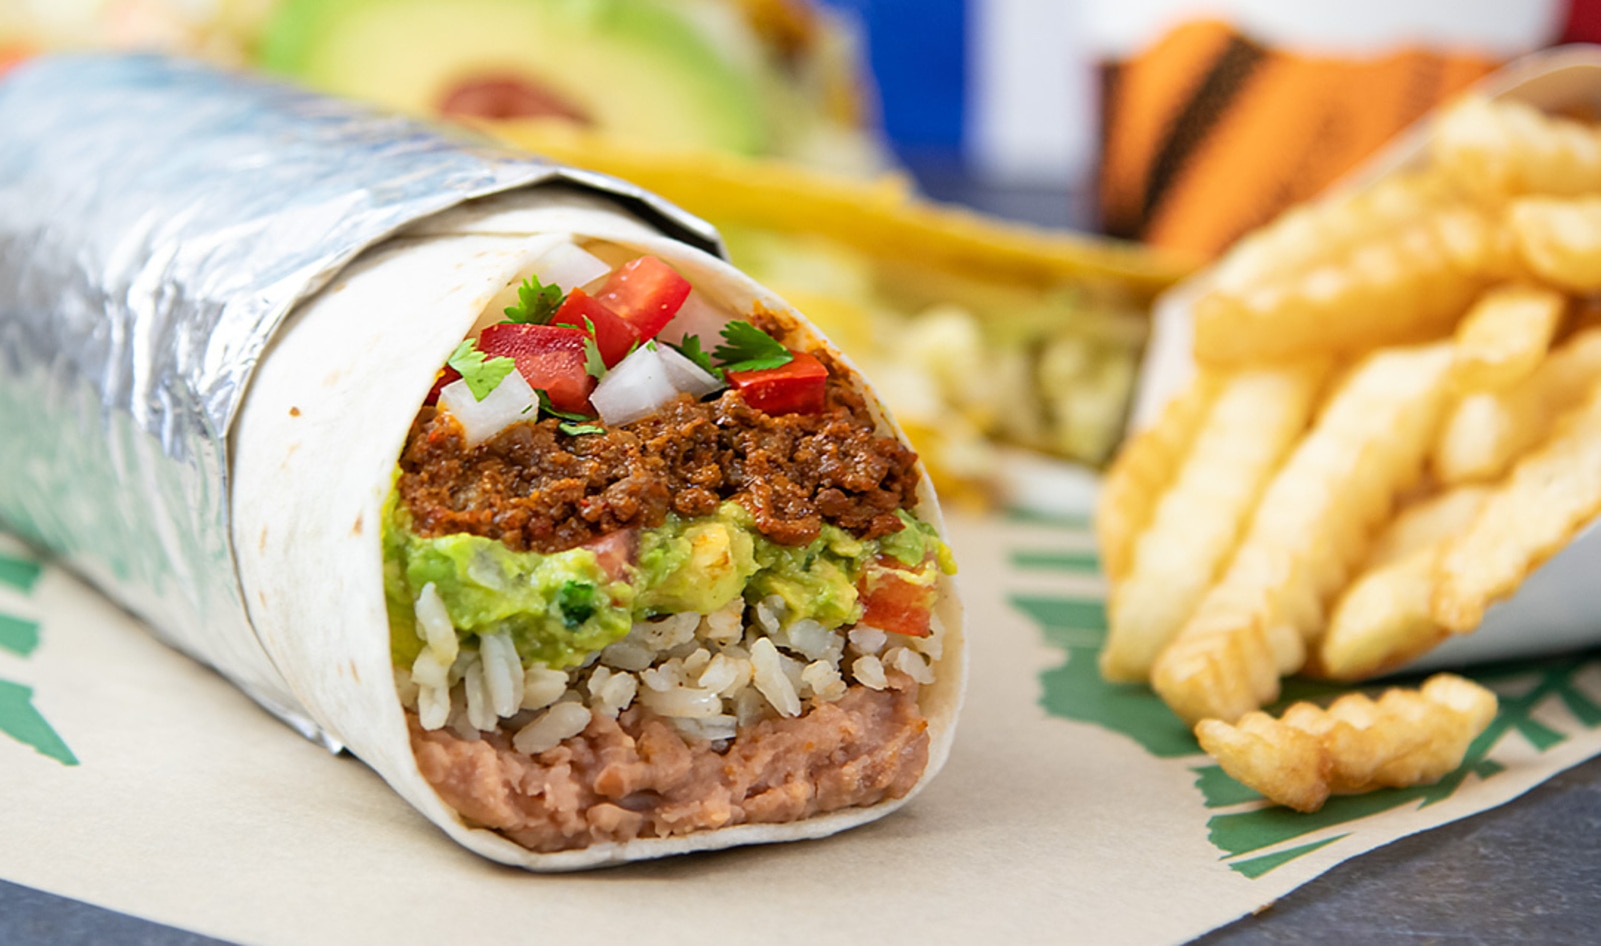 Del Taco Launches One-Pound Vegan Beyond Meat Burritos with Free Delivery for Fourth of July&nbsp;